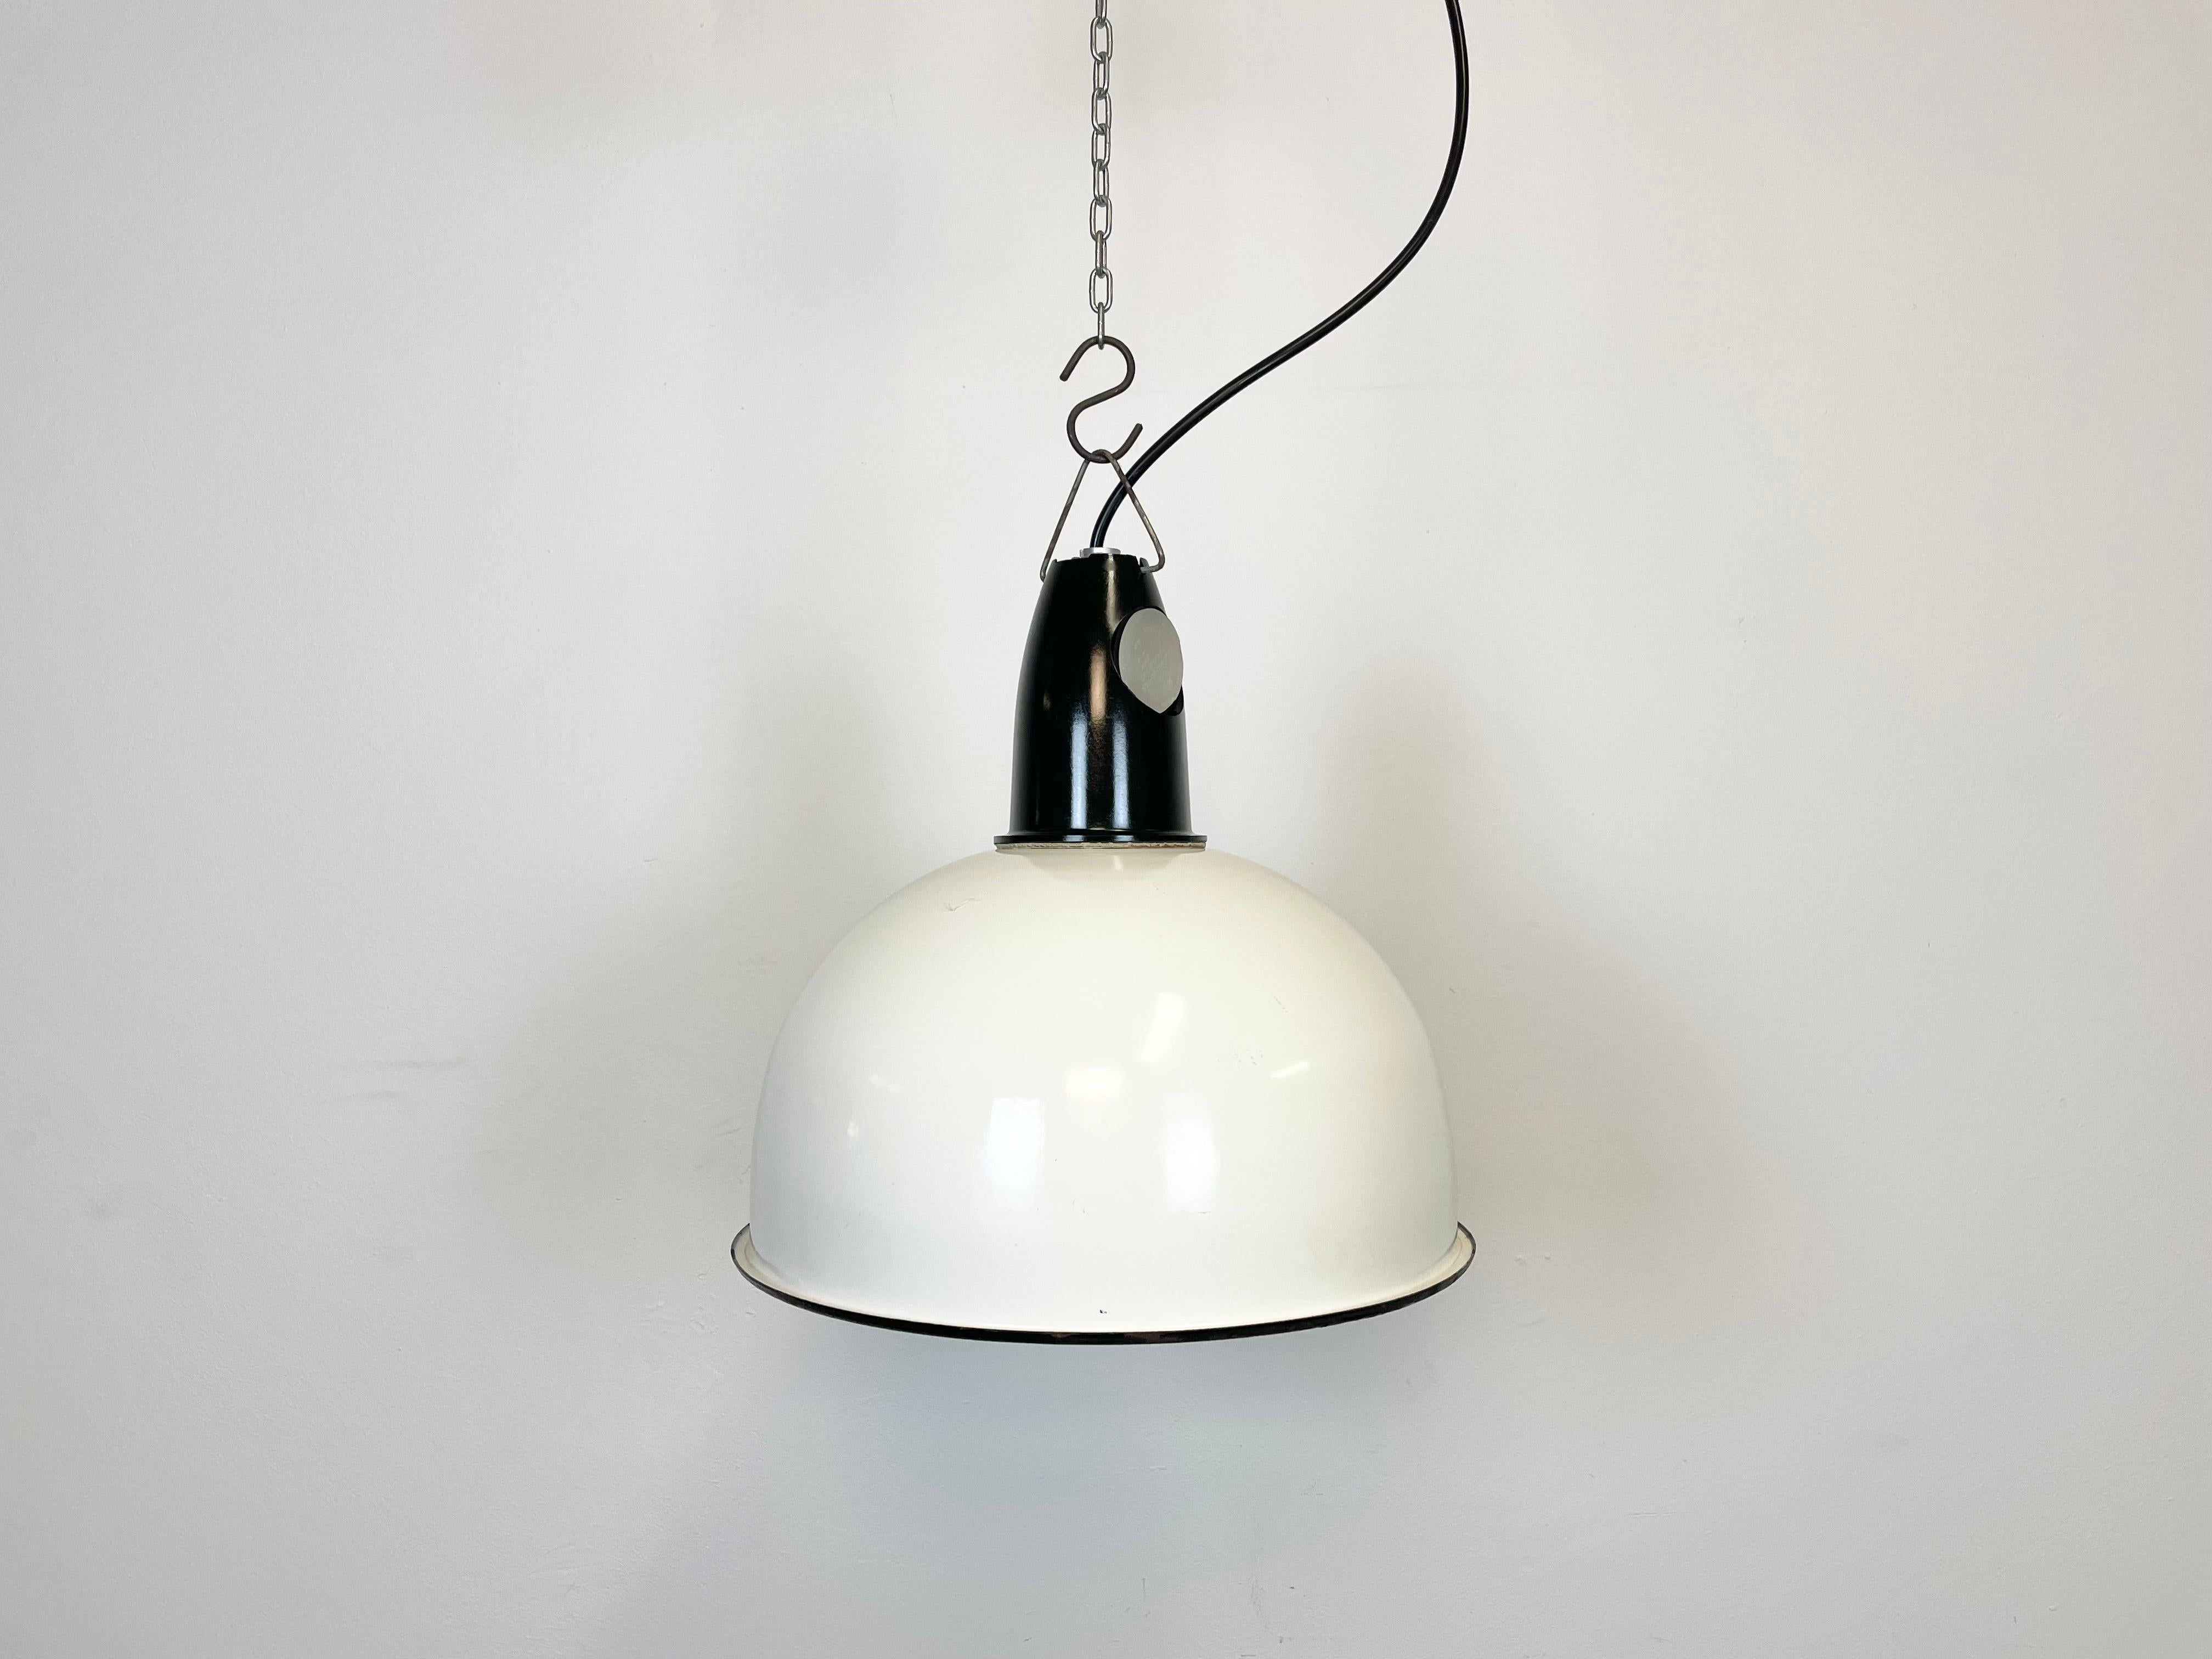 - Vintage Industrial lamp from the 1960s 
- Made in former Soviet Union
- White enamel shade
- Bakelite top 
- Socket requires E 27 lightbulbs 
- New wire 
- Lampshade diameter: 34 cm
- Weight : 2 kg.